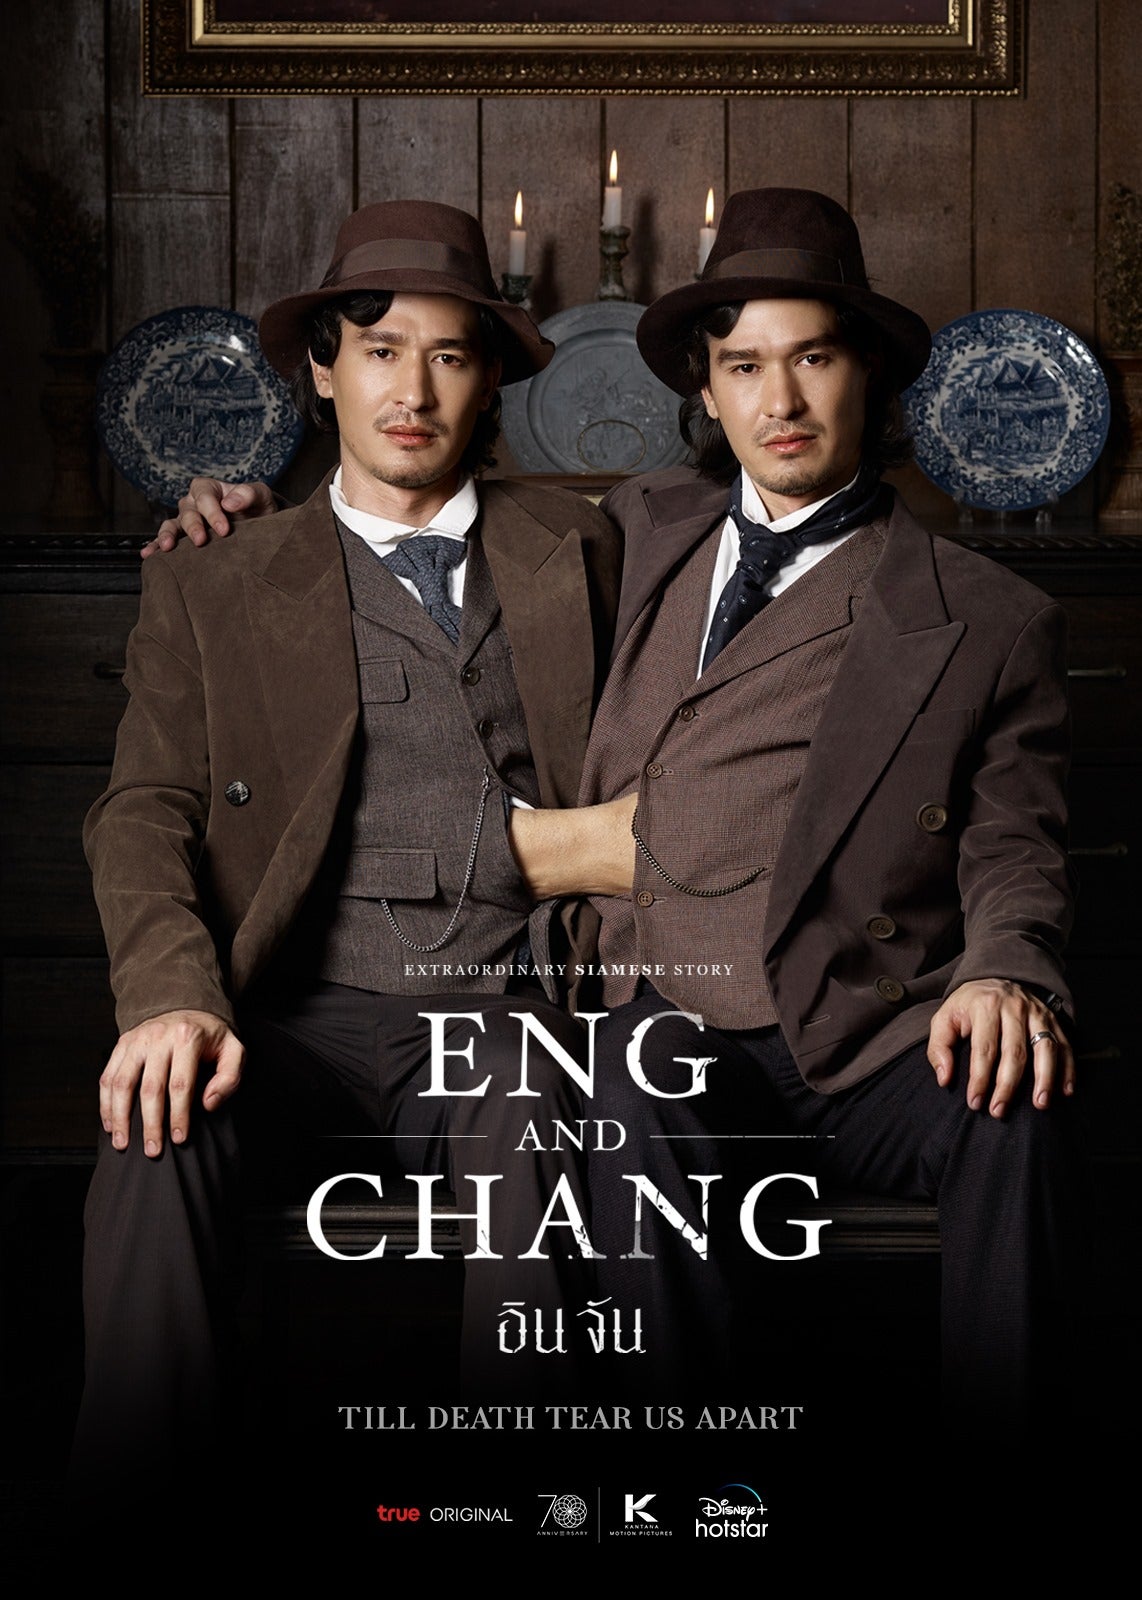 TV ratings for Extraordinary Siamese Story: Eng And Chang (อินจัน) in India. Disney+ TV series